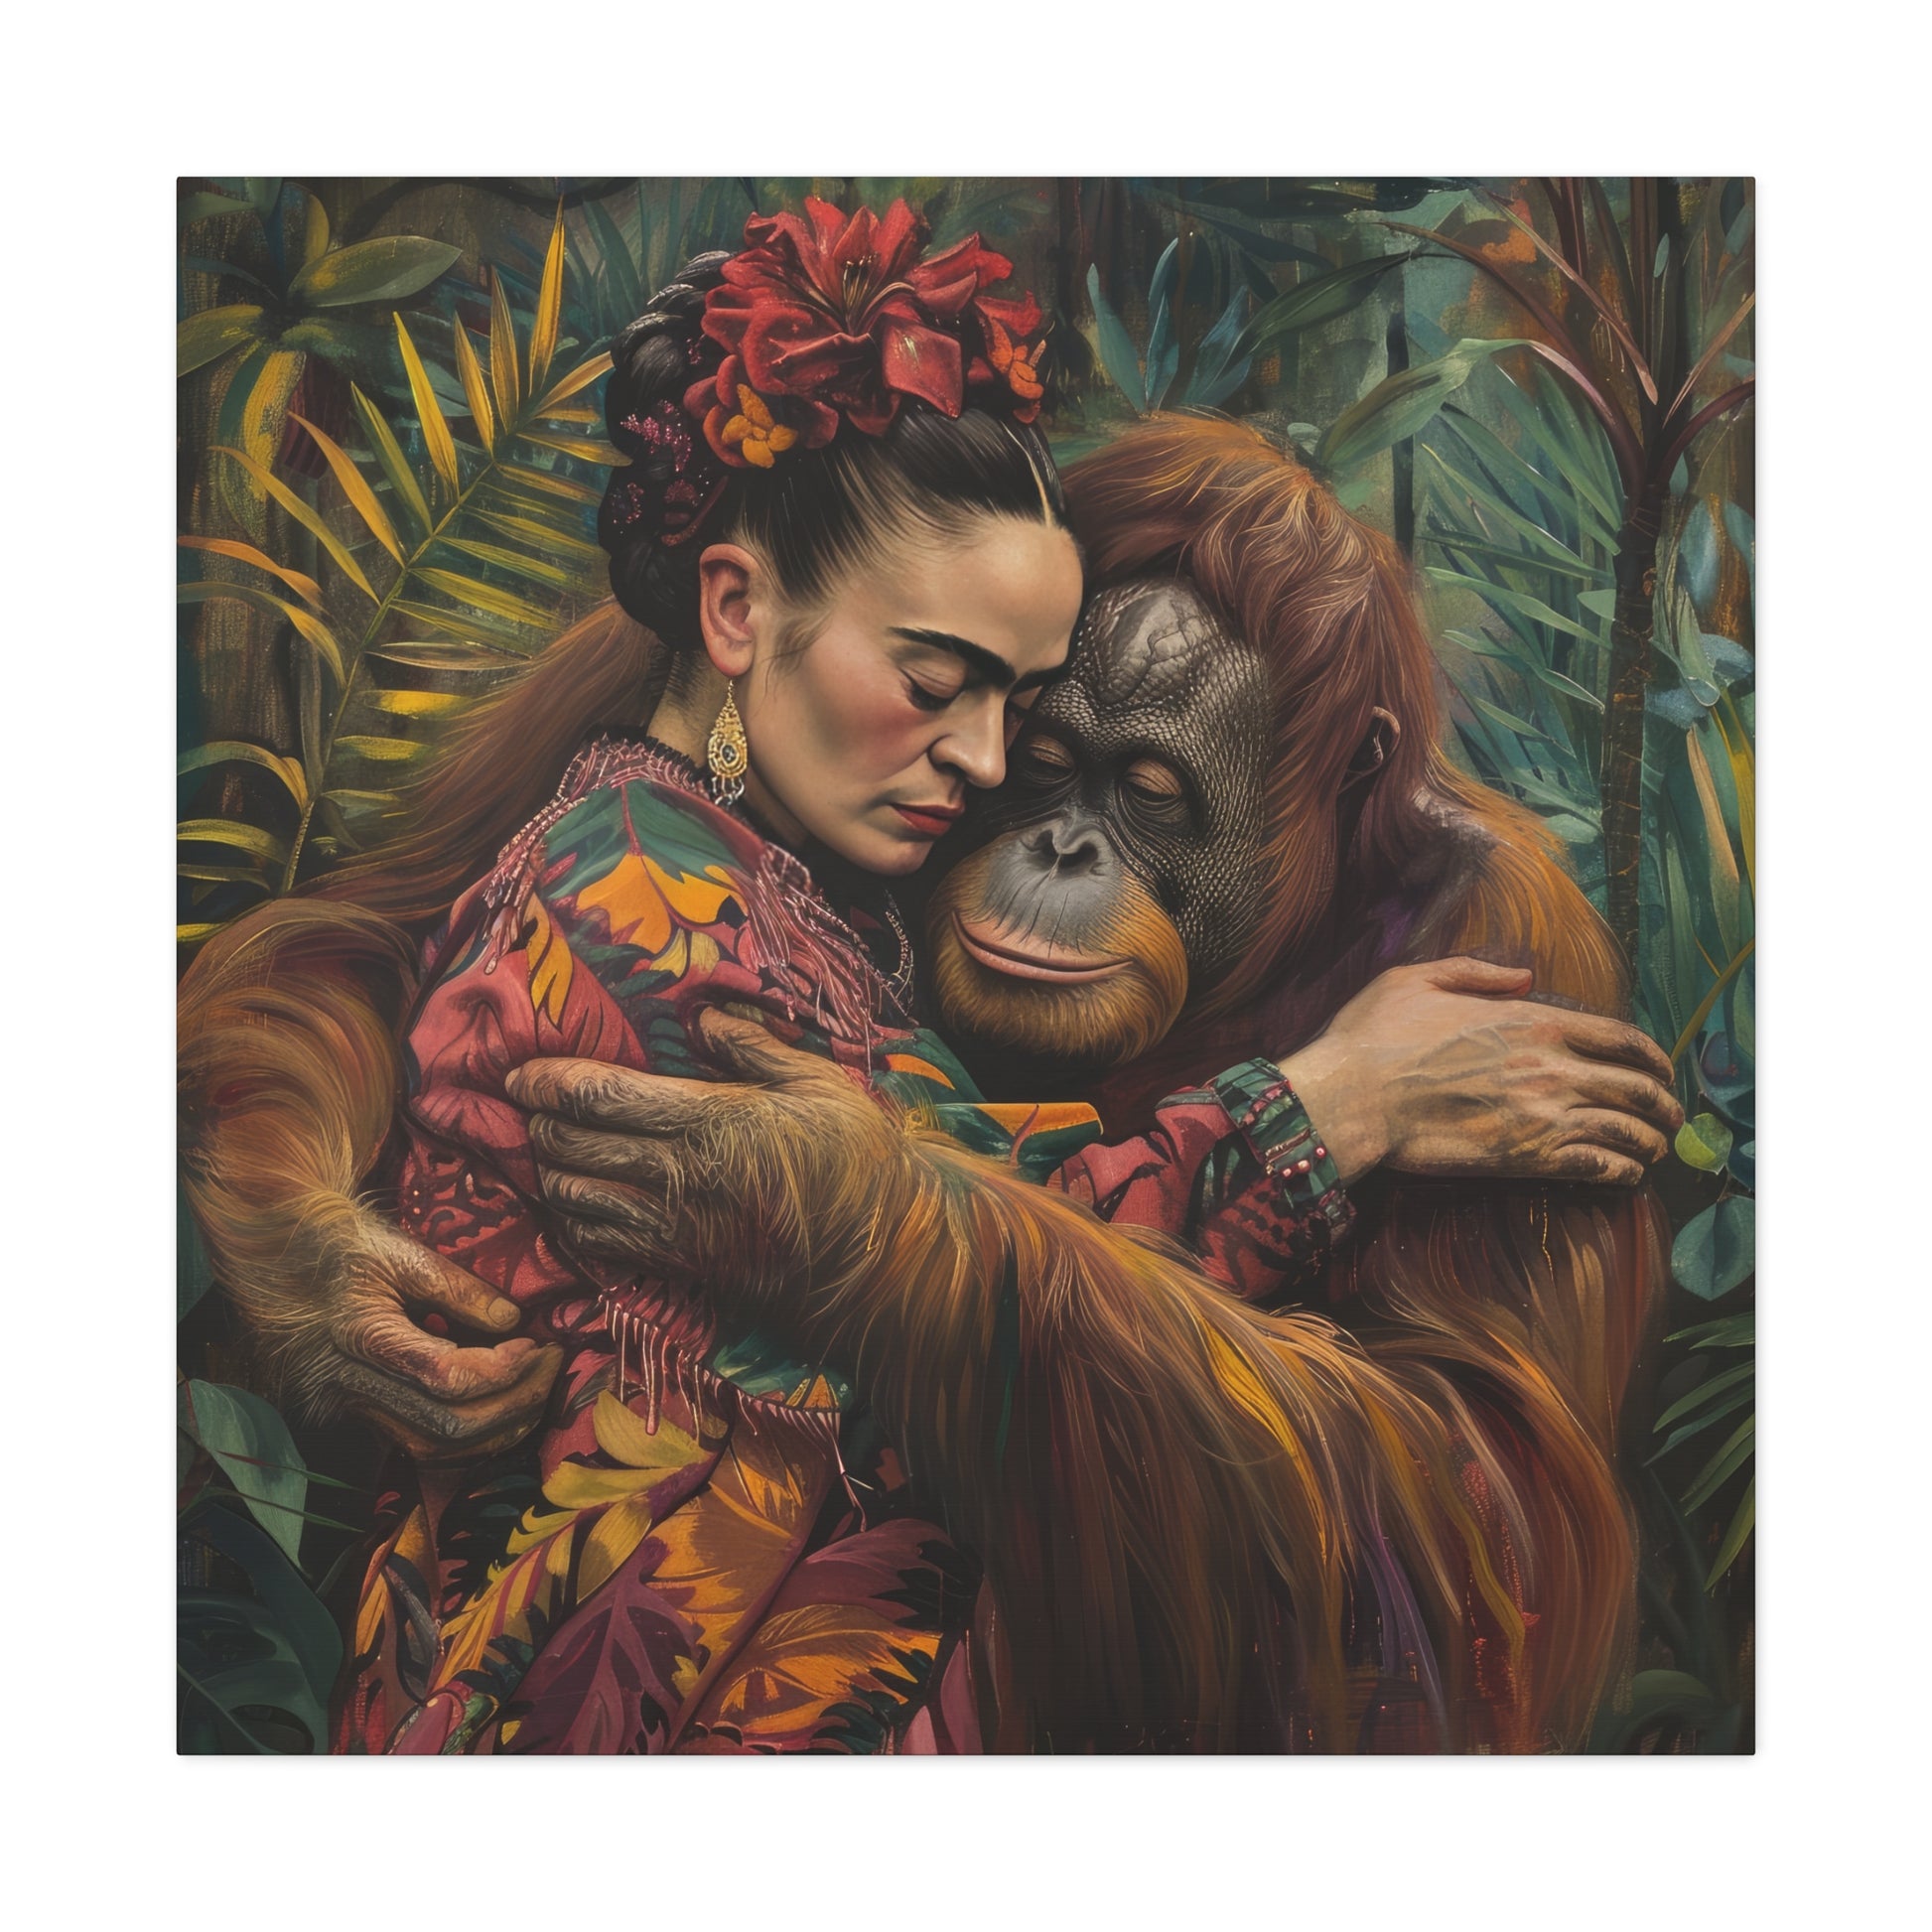 A woman in a floral dress embracing an orangutan in a tropical forest setting, depicted in a David Miller inspired canvas print by Printify.